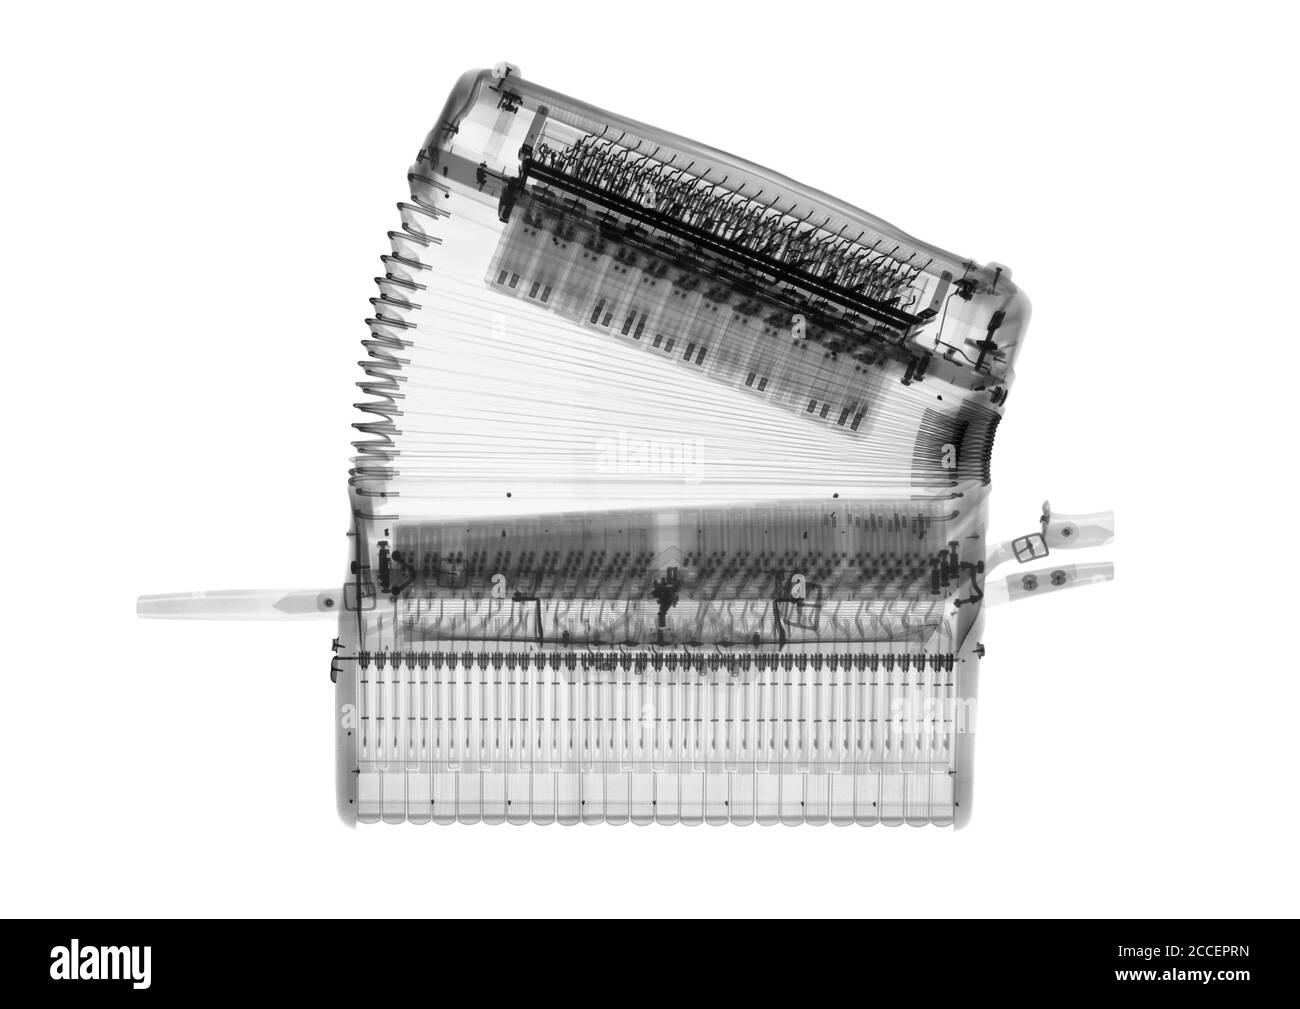 Accordéon piano, rayons X. Banque D'Images